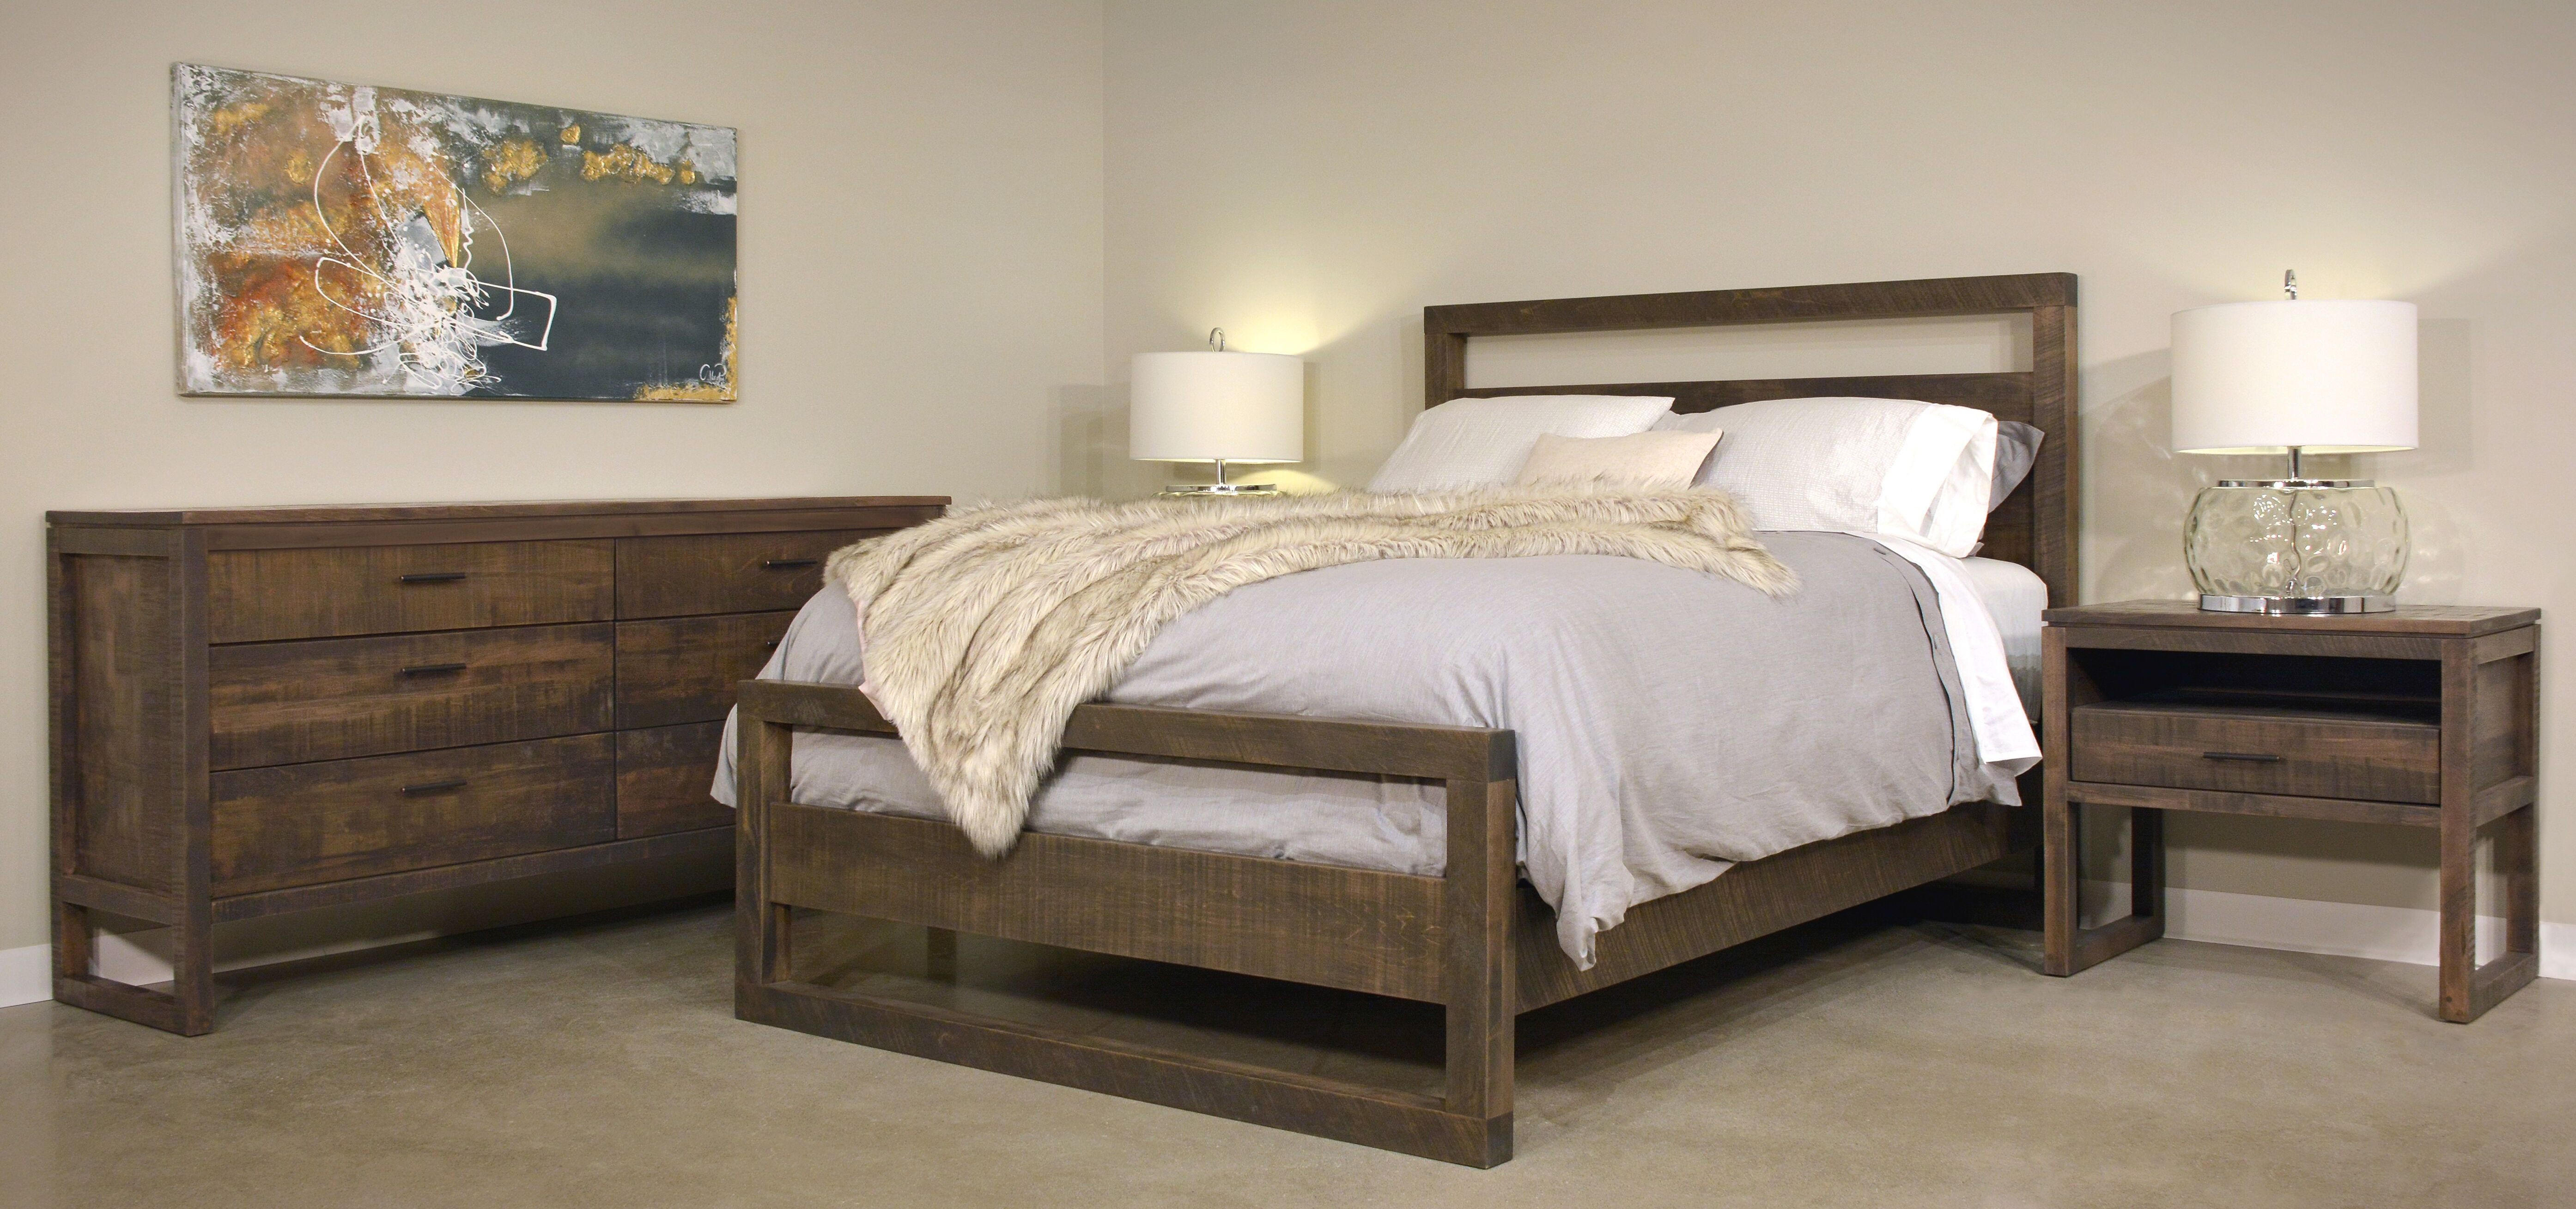 Ruff Sawn Tempus Bedroom Furniture Collection